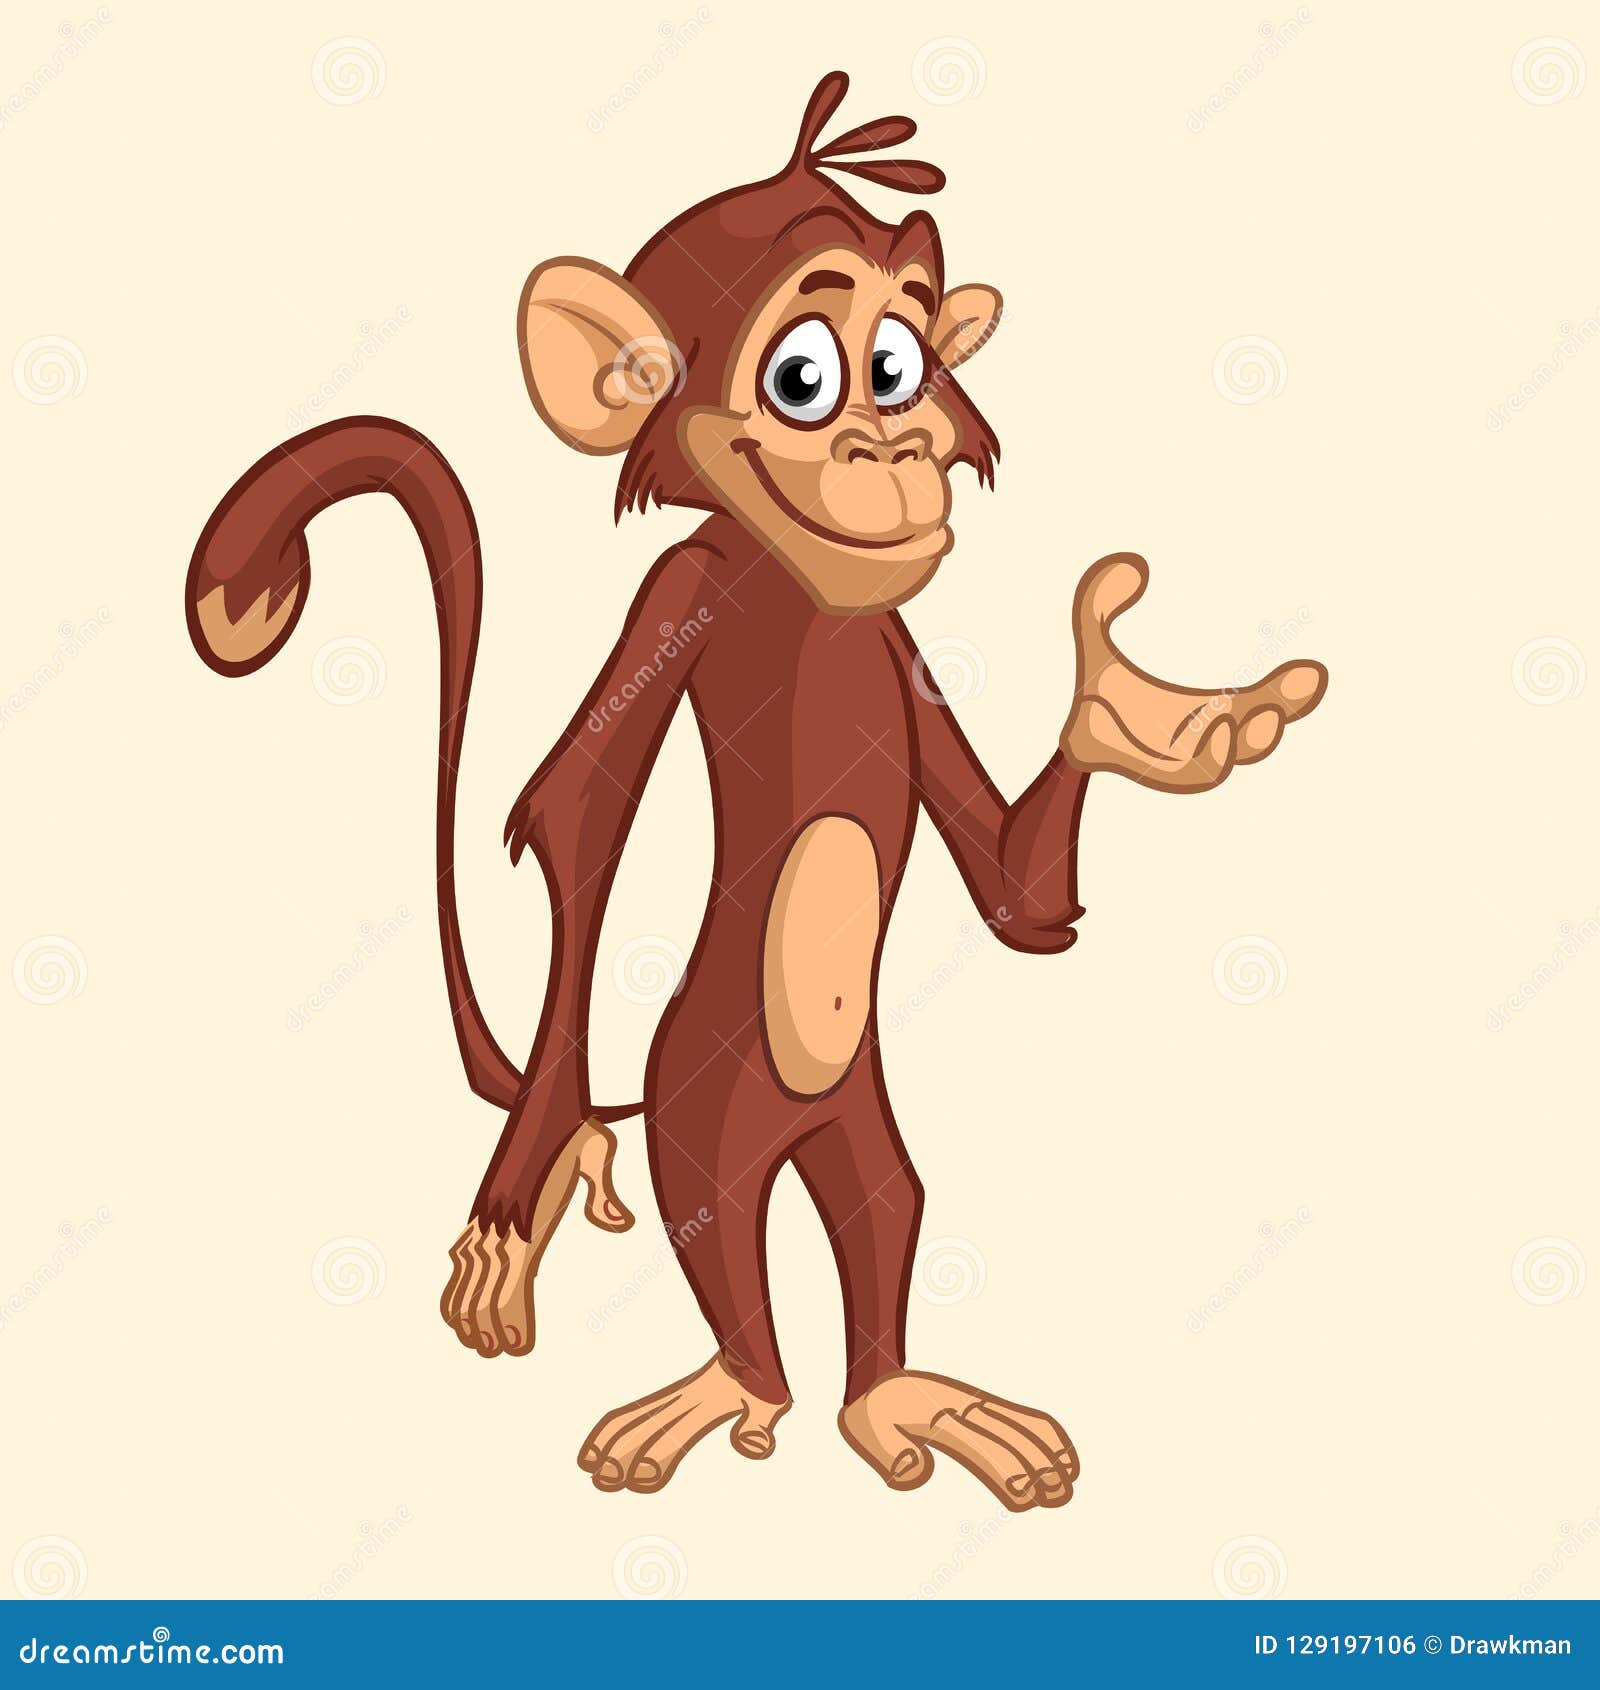 Funny Monkey Cartoon Icon. Vector Illustration of Drawing Monkey Outlined.  Stock Vector - Illustration of friendly, icon: 129197106